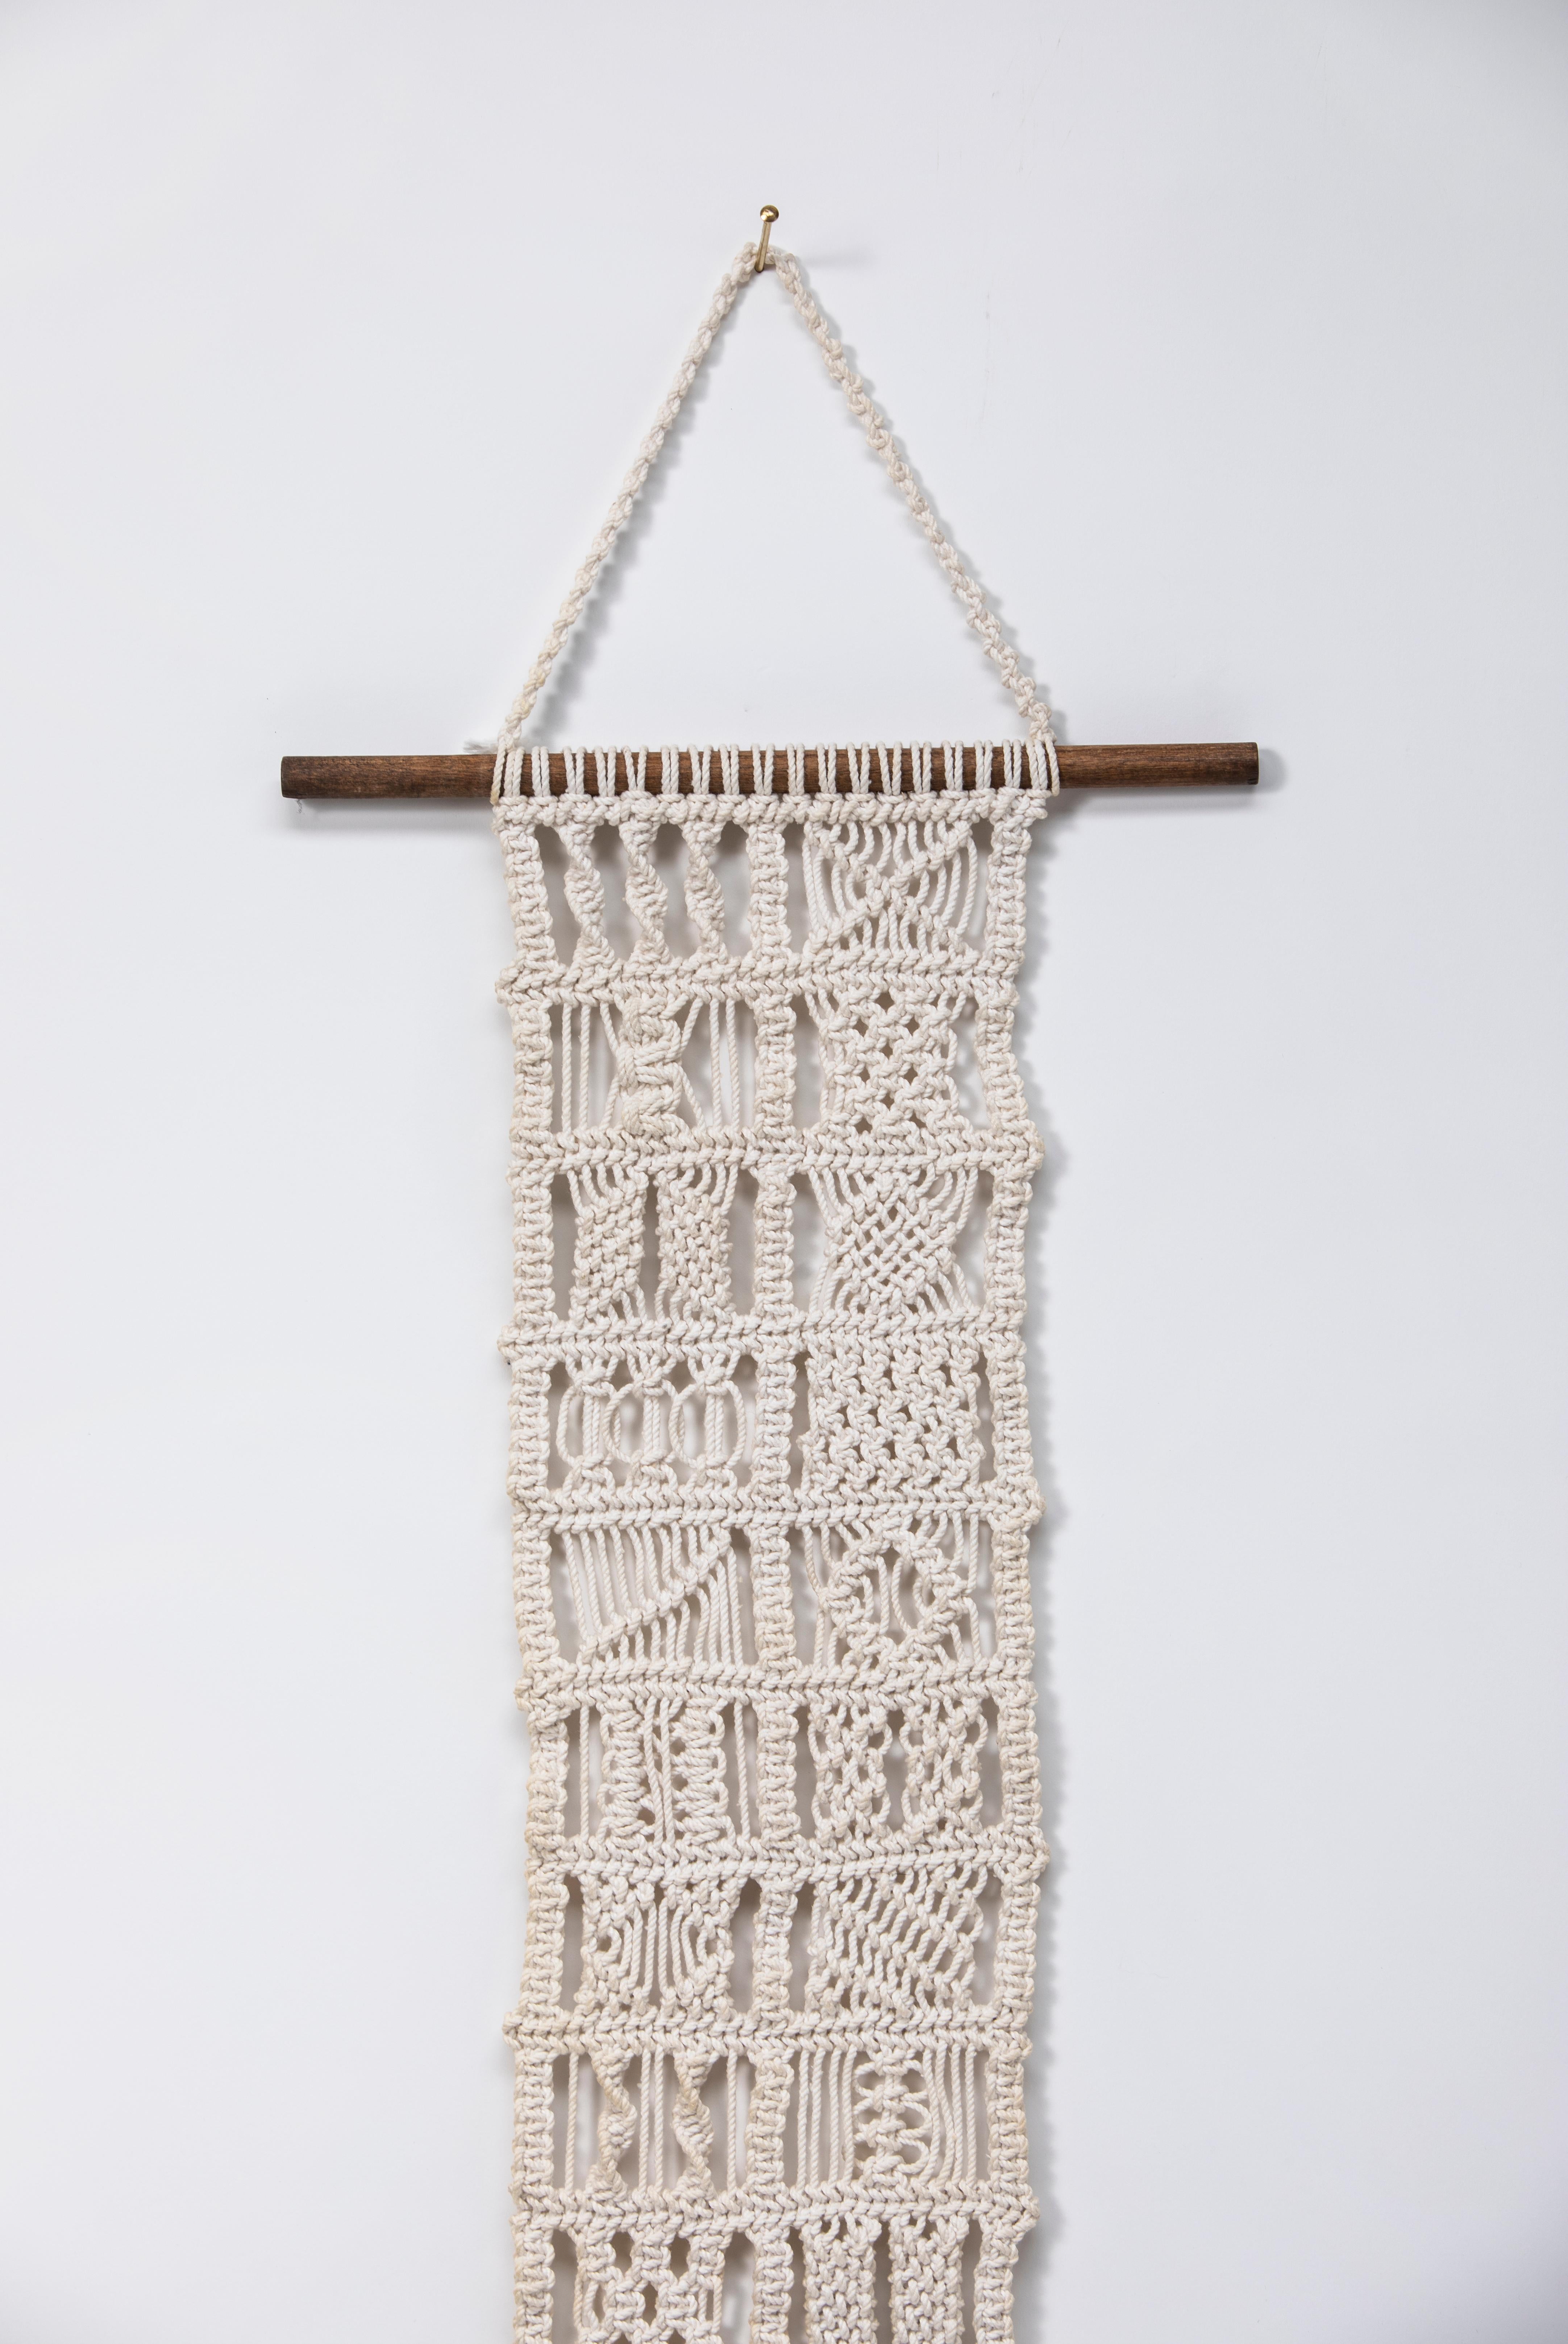 Hand-Knotted Macrame Wall Hanging Art Sampler For Sale